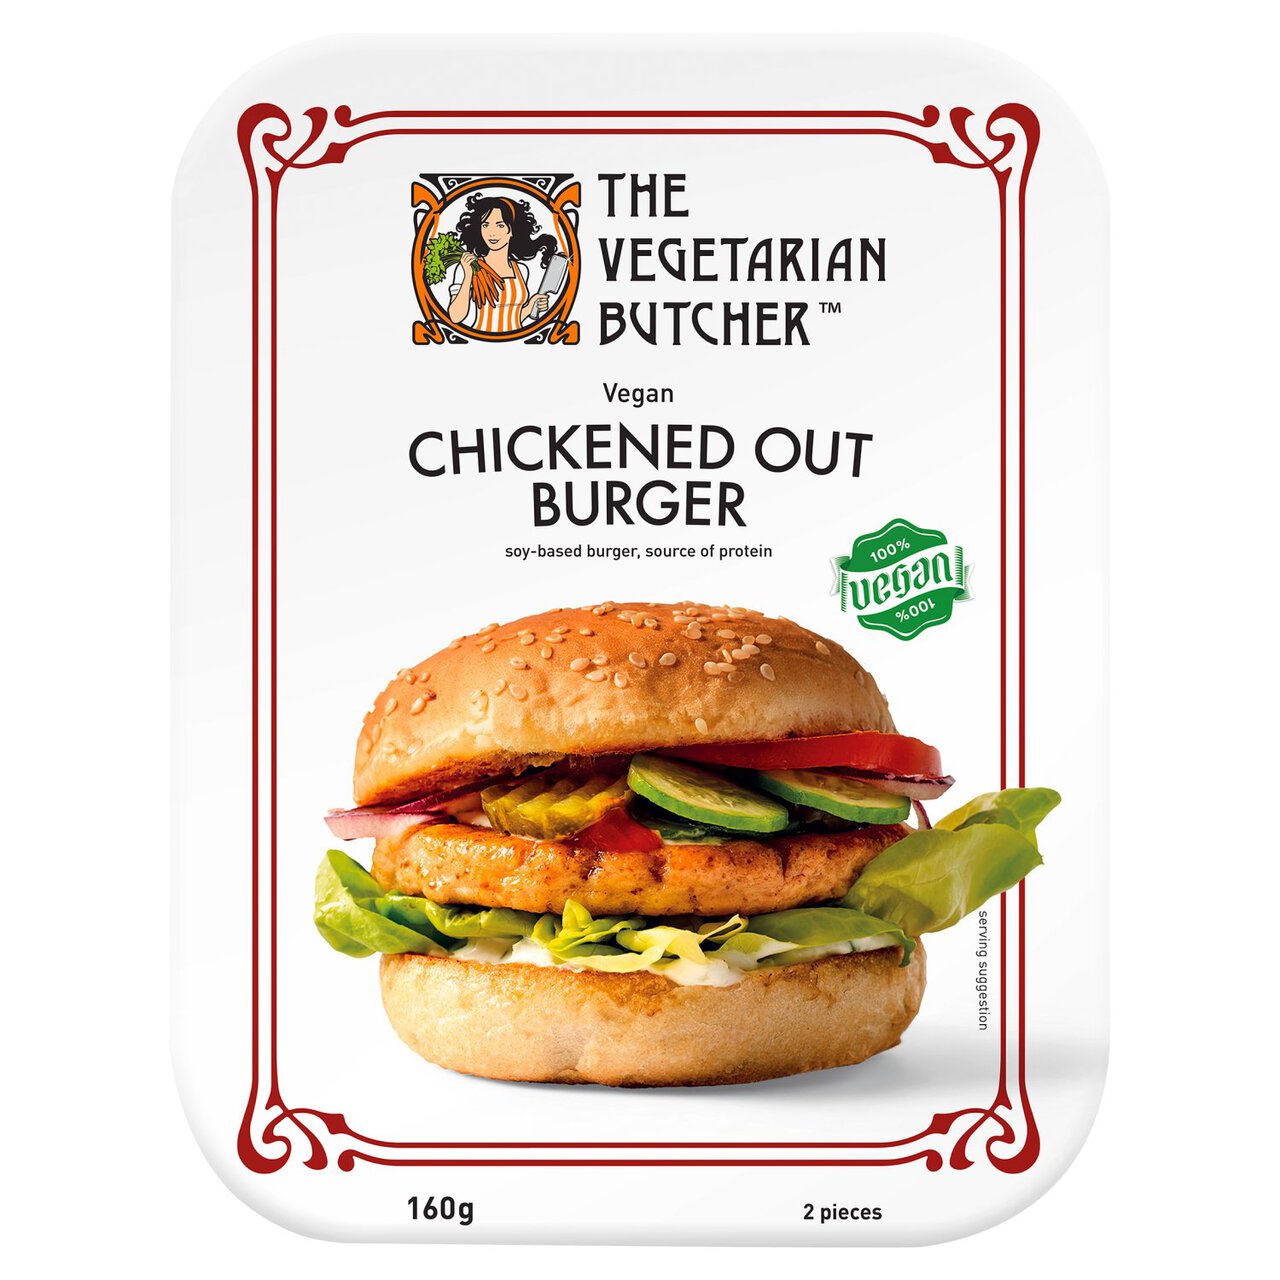 The Vegetarian Butcher Chickened Out Vegan Chicken Burger 160g